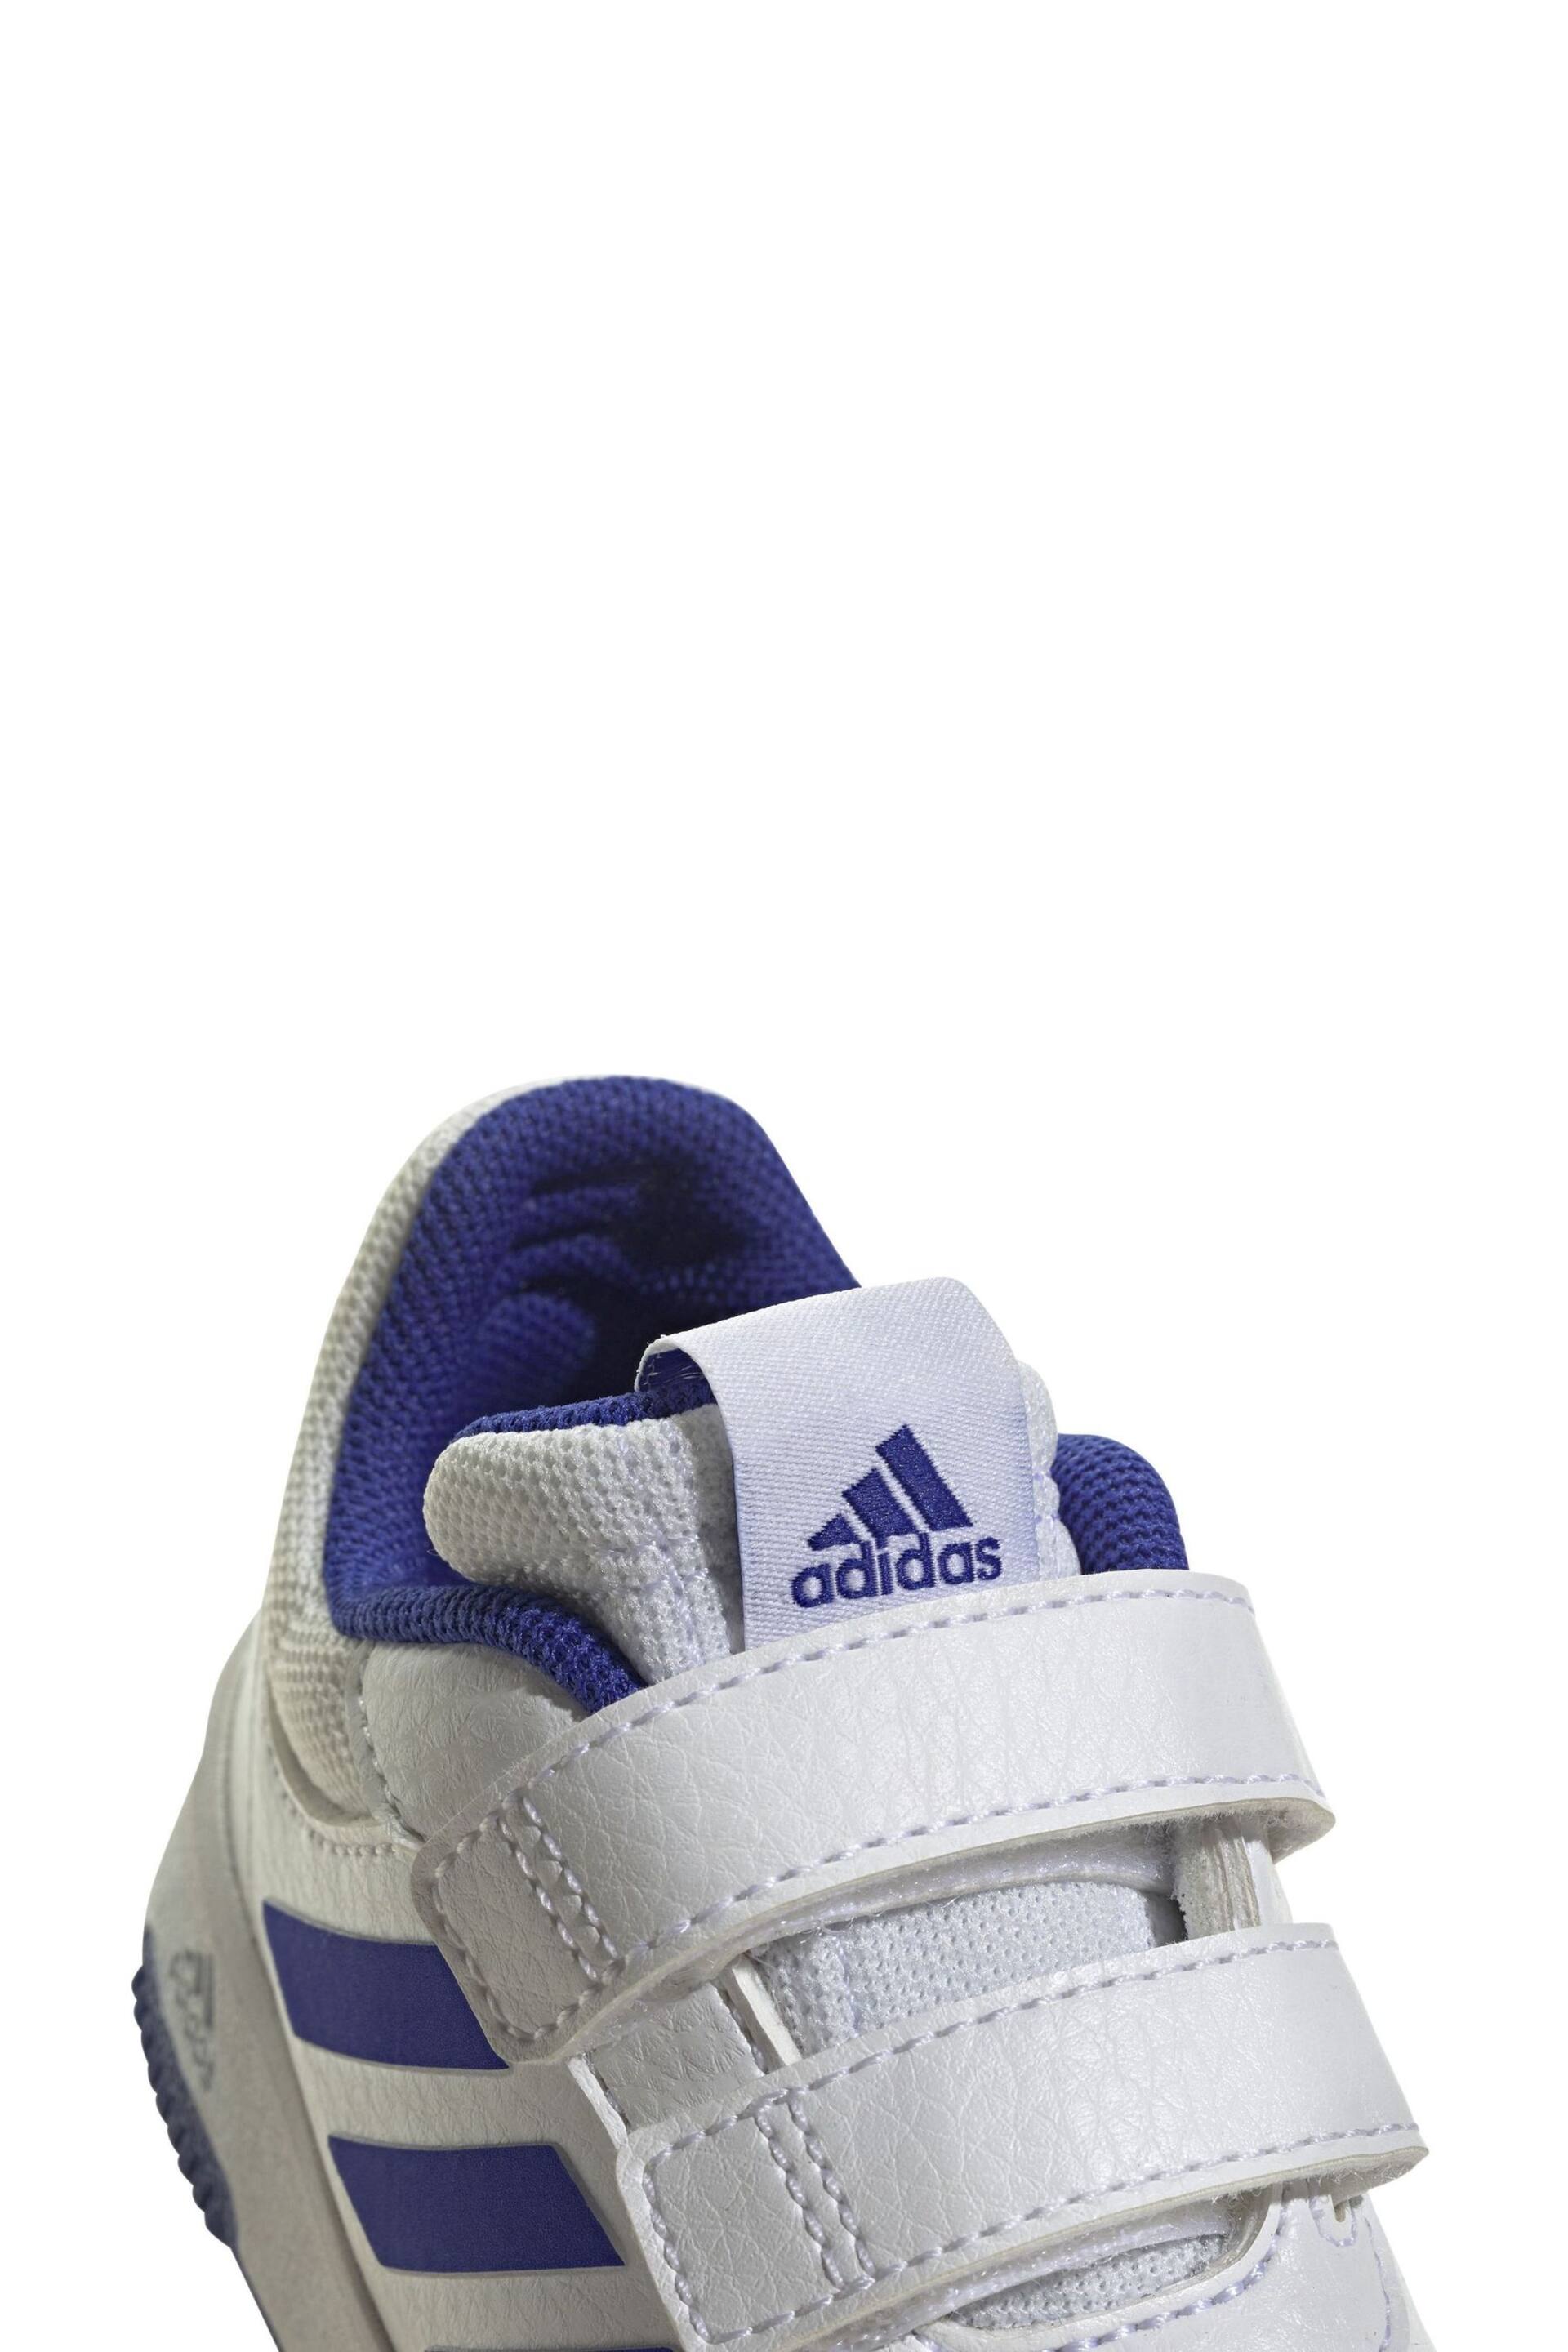 adidas White/Blue Tensaur Hook and Loop Shoes - Image 8 of 9